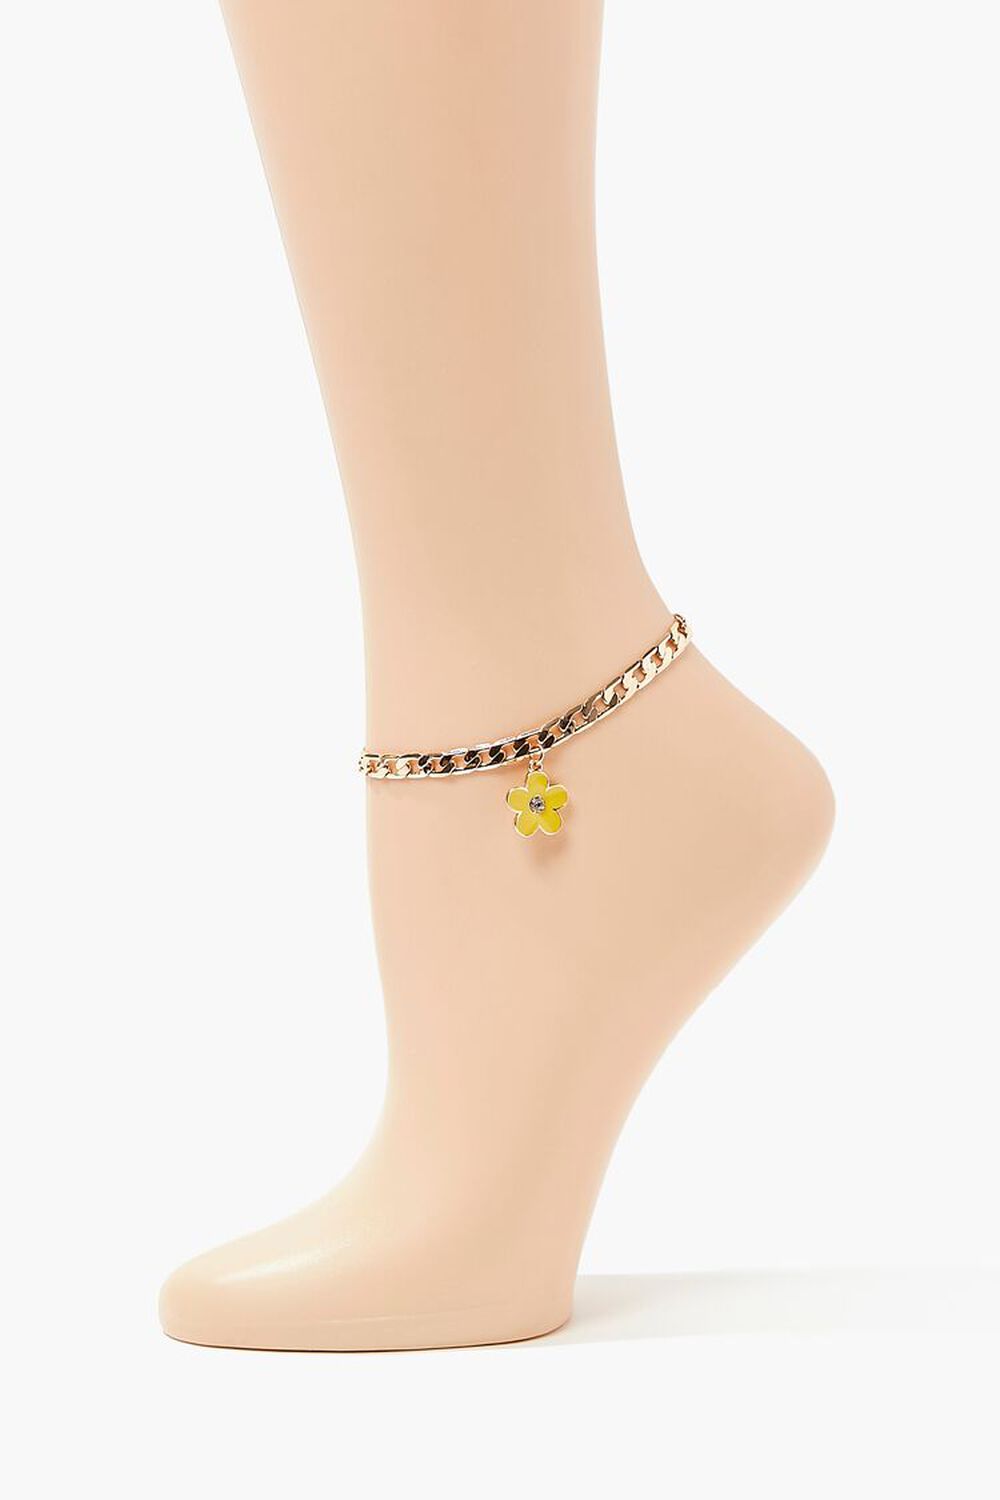 Flower Charm Chain Anklet, image 1